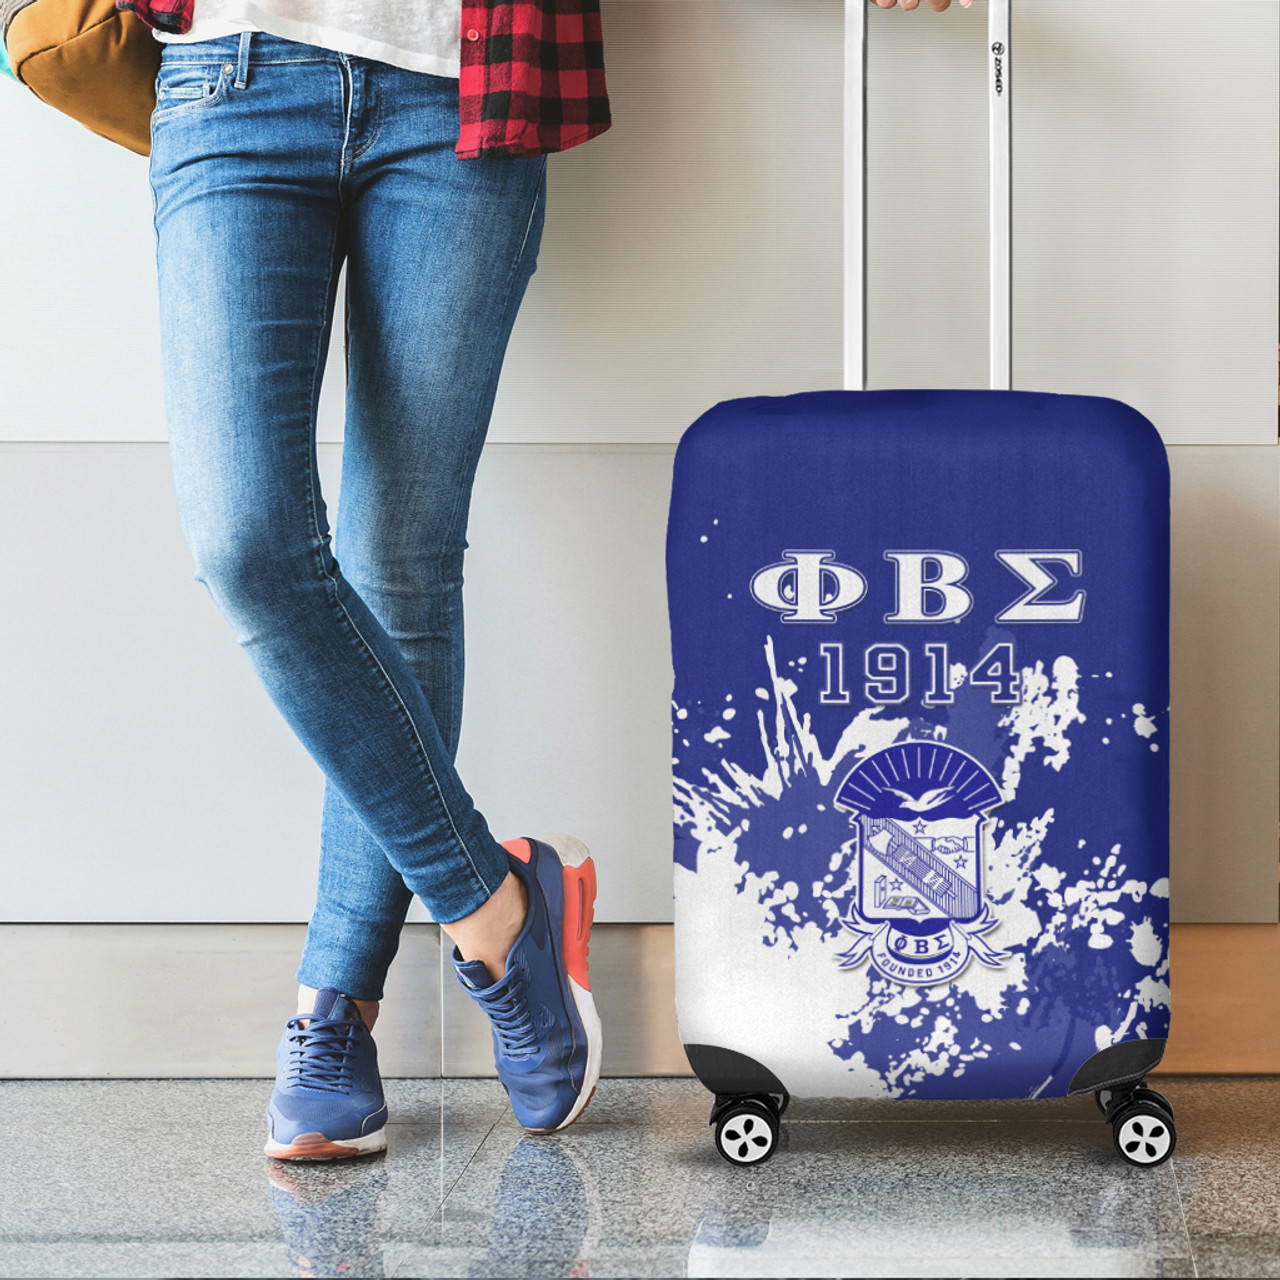 Phi Beta Sigma Luggage Cover Spaint Style